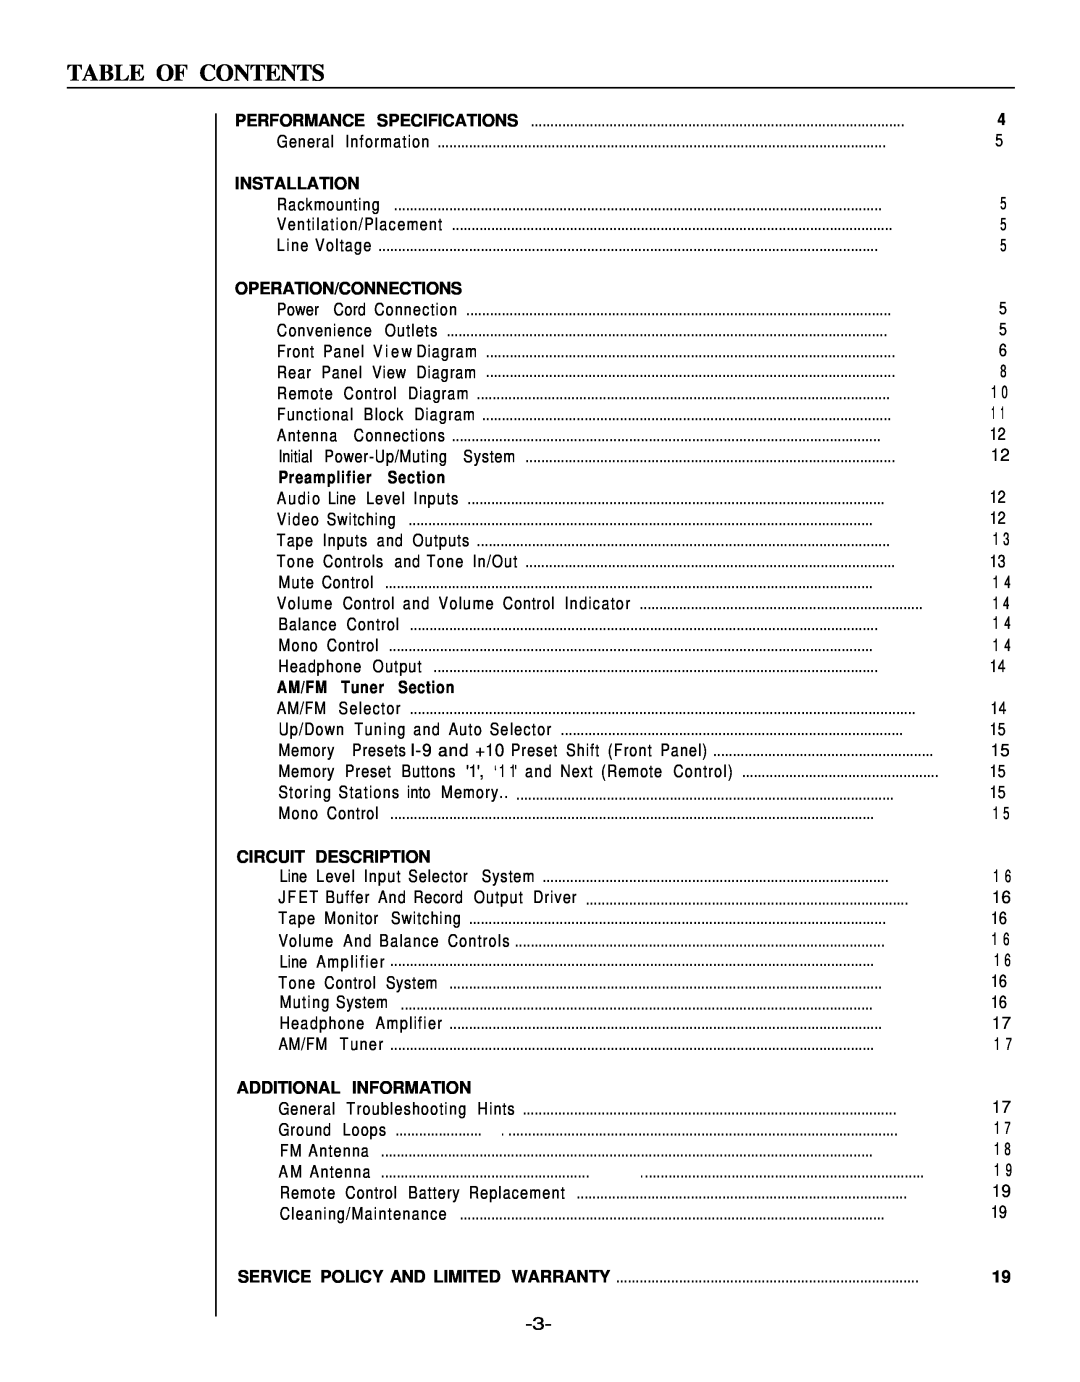 Hafler 945 manual Table Of Contents, Installation, Operation/Connections, Preamplifier Section, AM/FM Tuner Section 